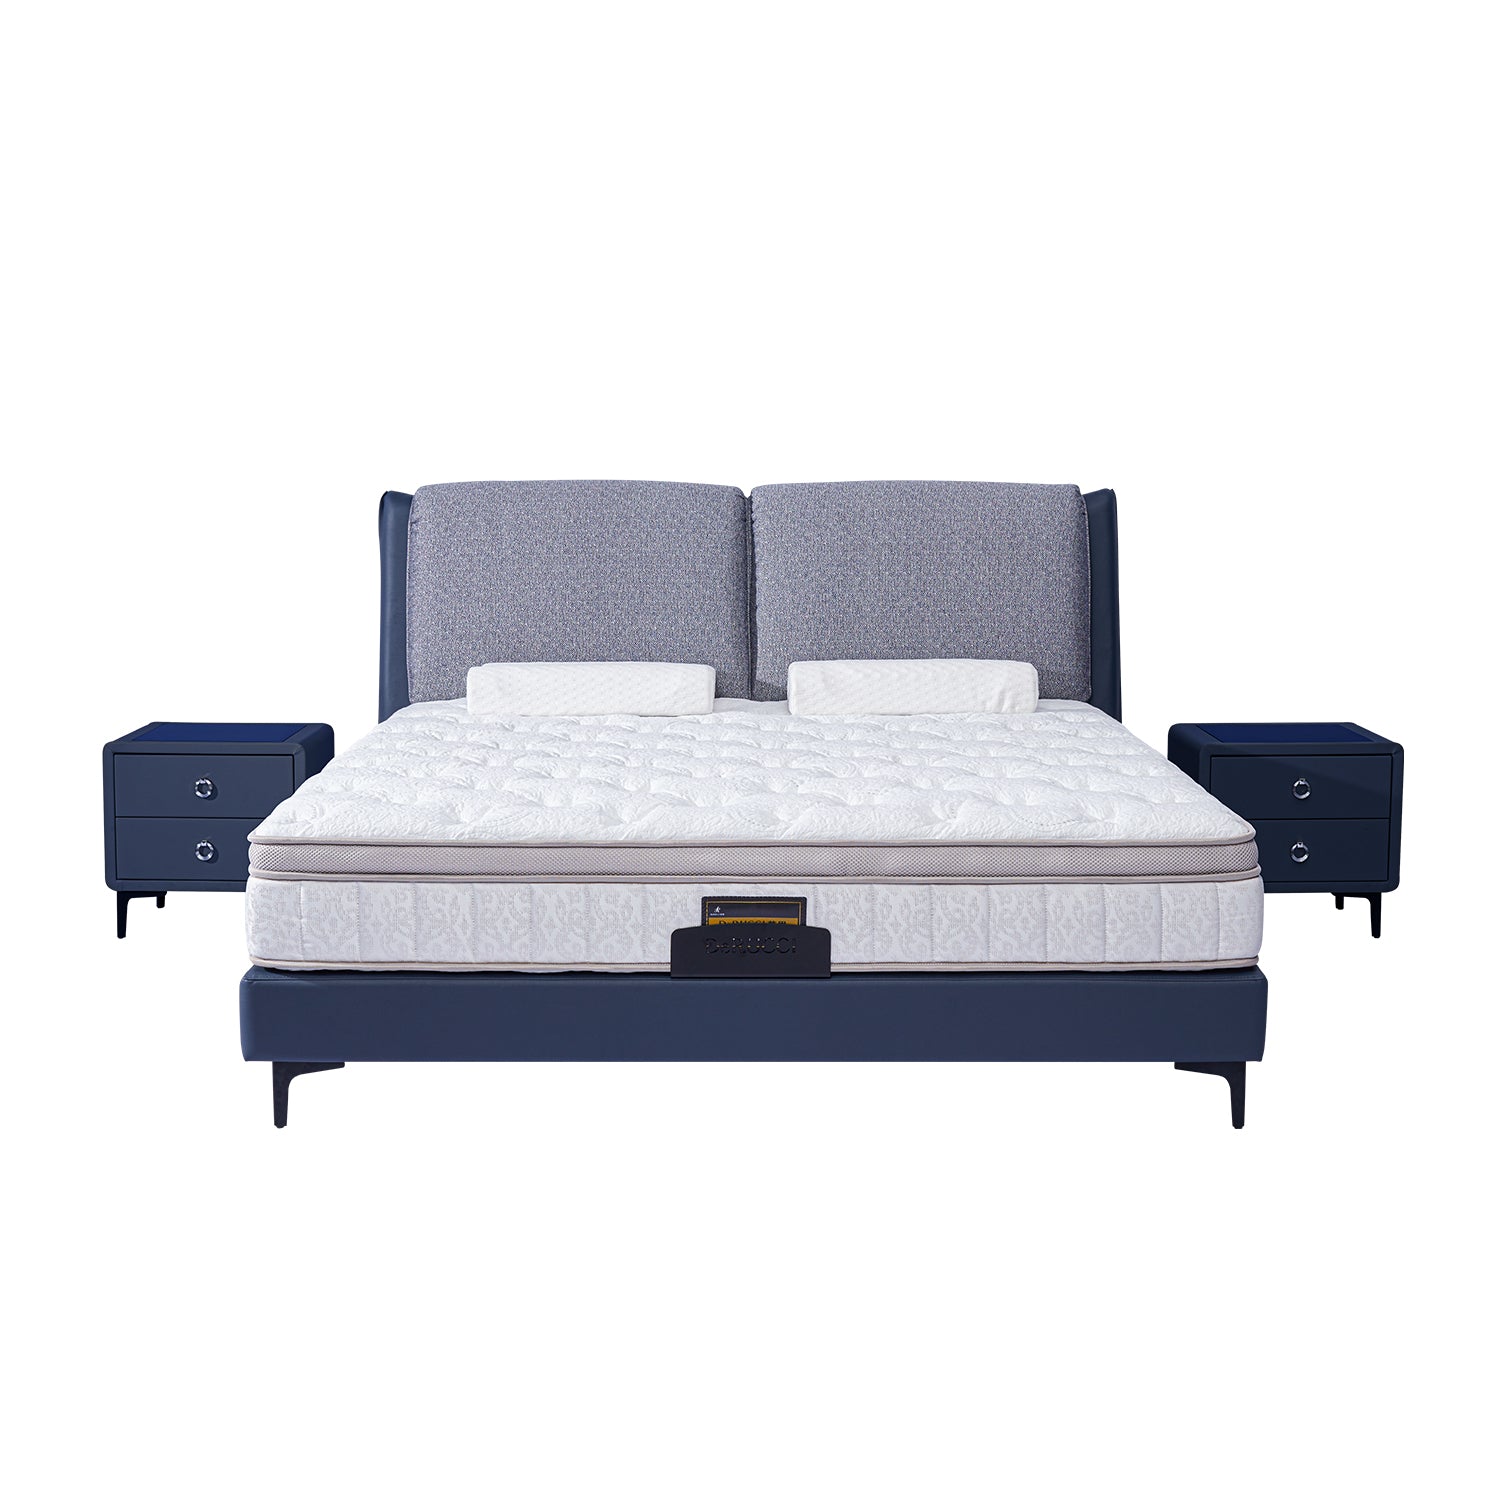 Stylish Bed Frame BOC1 - 017 with blue fabric upholstery, padded headboard, tufted white mattress, and matching blue nightstands.